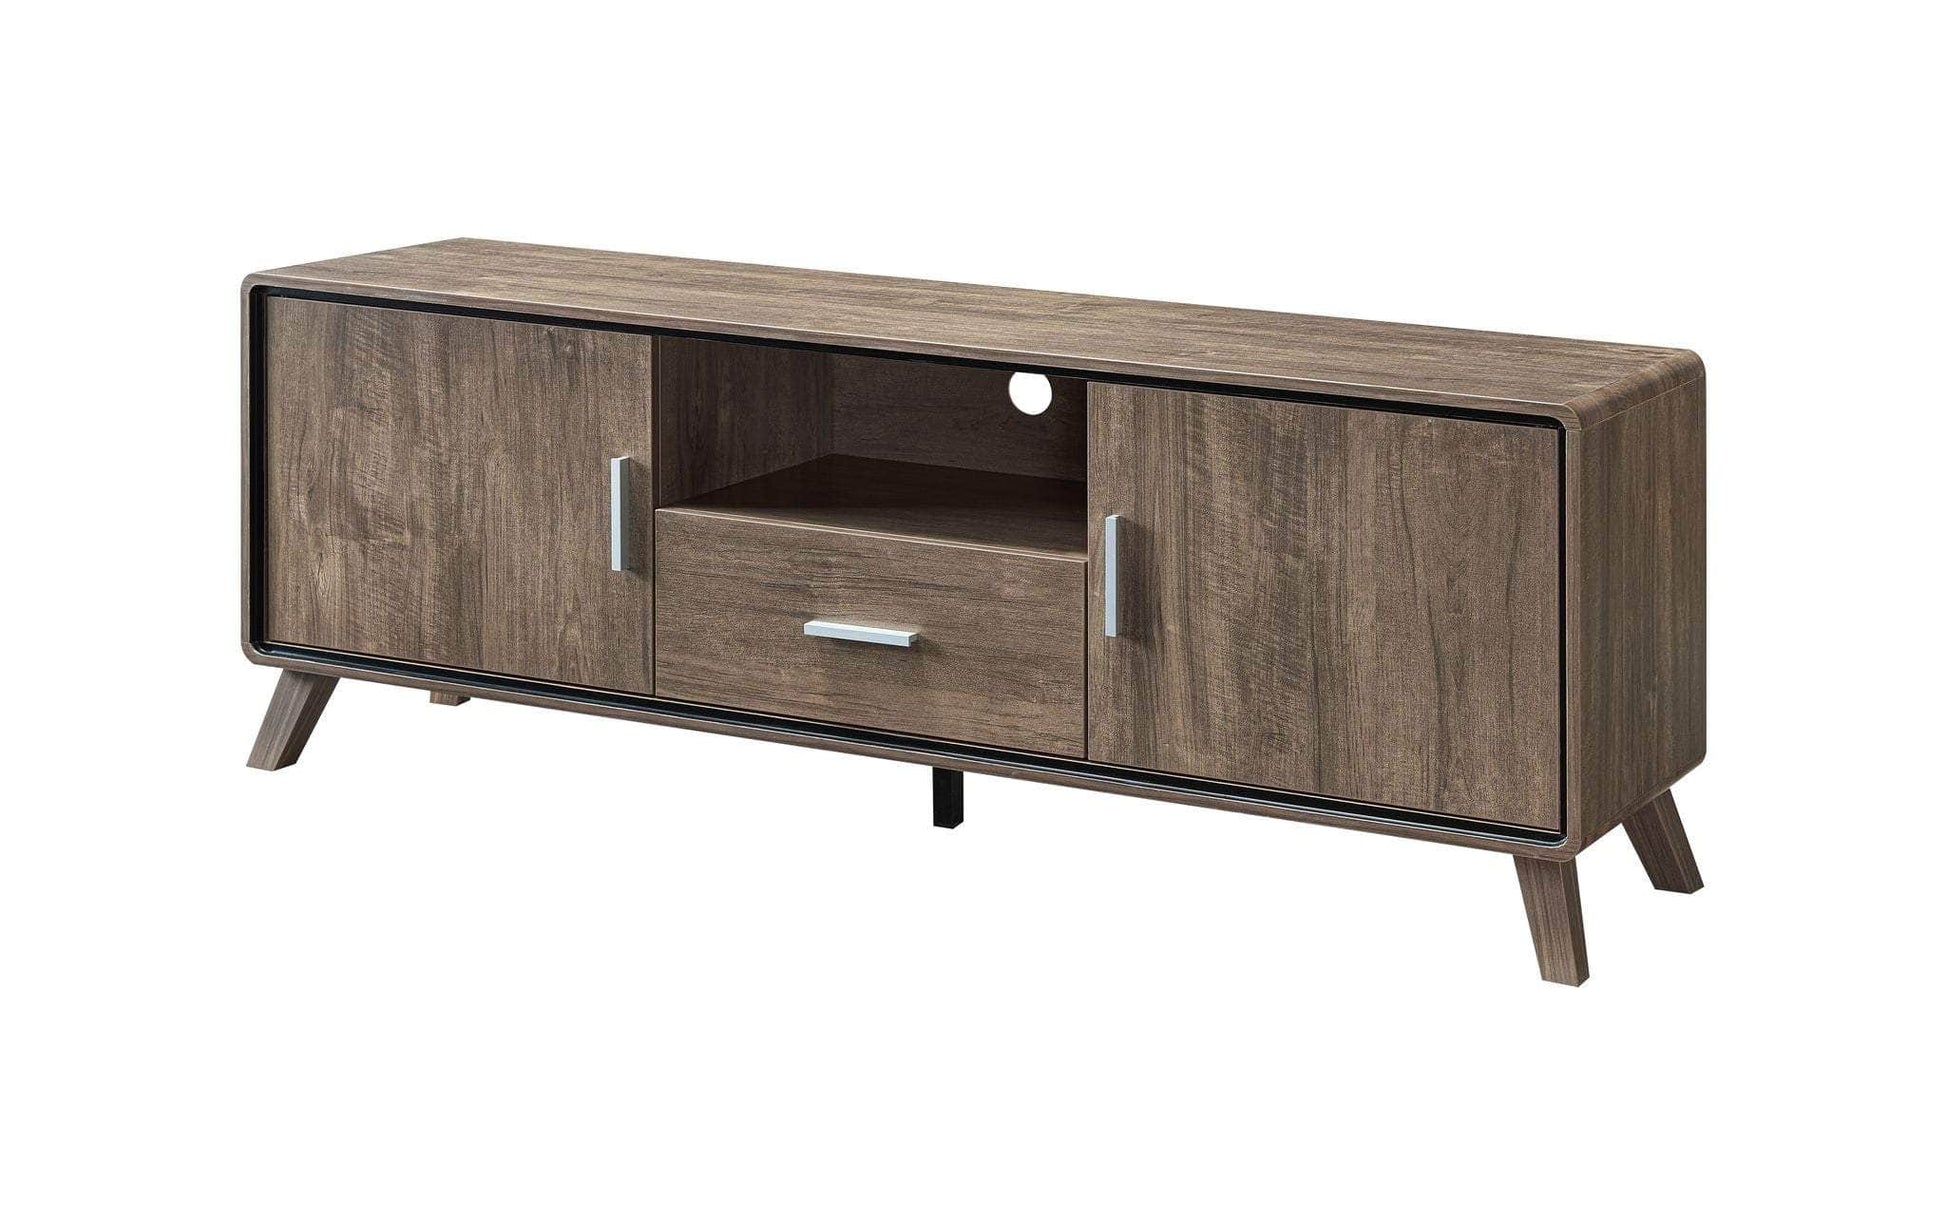 Pending - Brassex Inc. TV Stand Walnut Oak Alessia 60" TV Stand With Storage - Available in 2 Colours